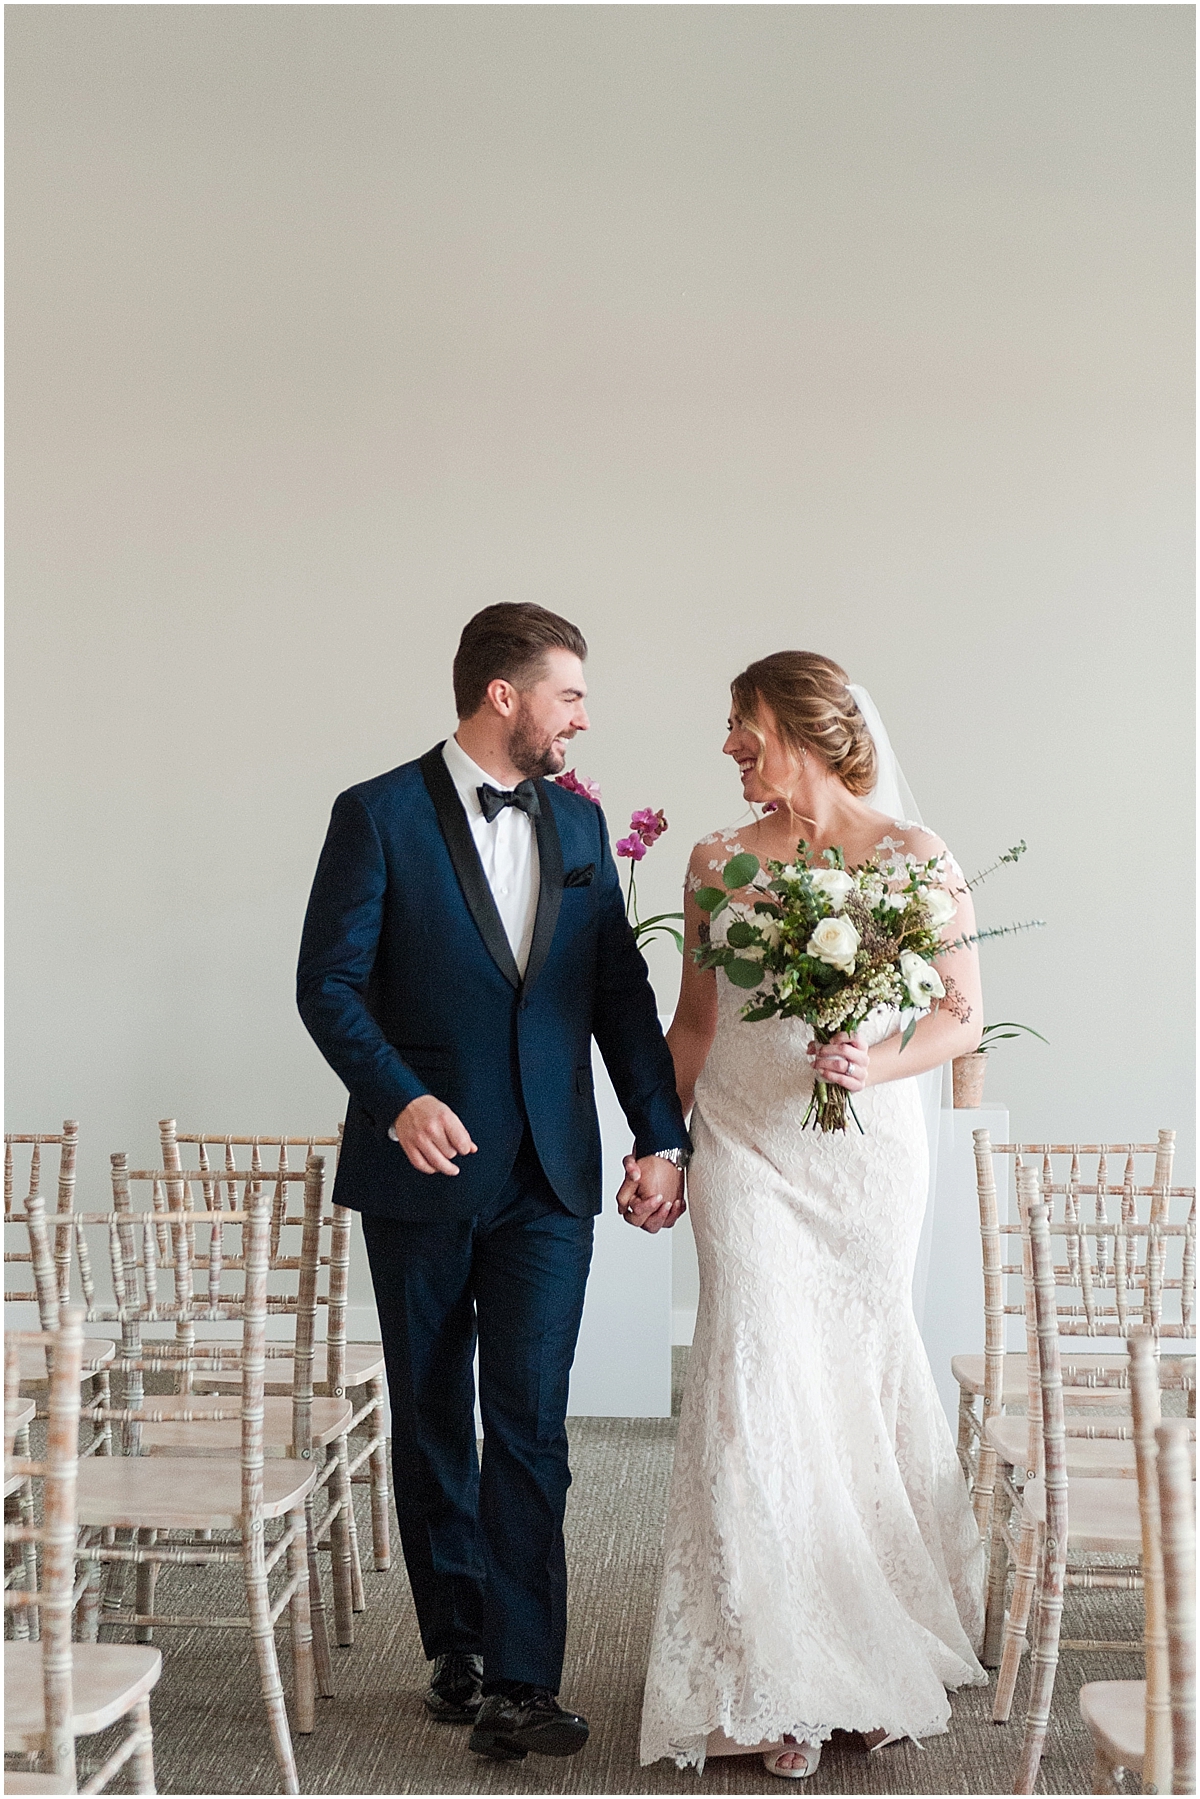 2018 and 2019 weddings in columbus ohio, Destination weddings, New Albany wedding venues, Lewis center wedding venues, New Albany wedding photographers, The Estate at New Albany